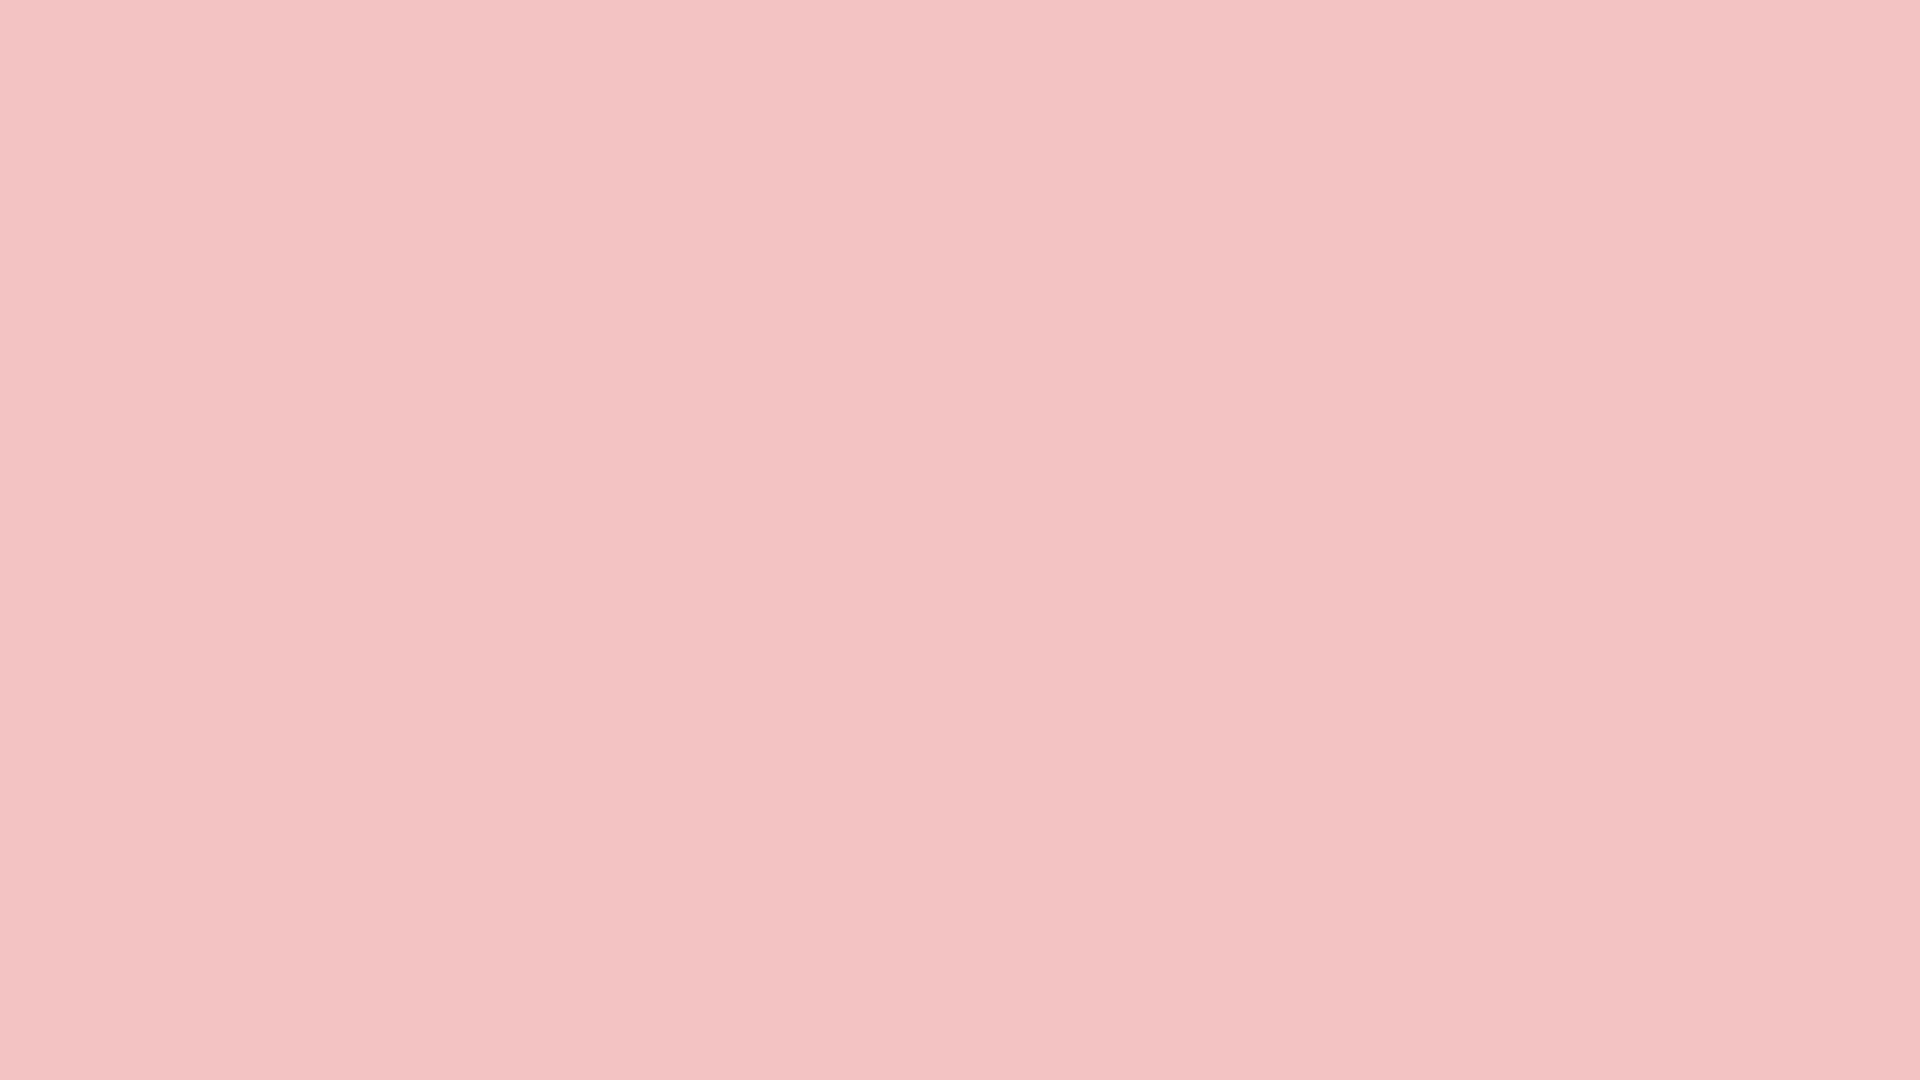 Free Pink Solid Color Background Photos, [100+] Pink Solid Color Background  for FREE 